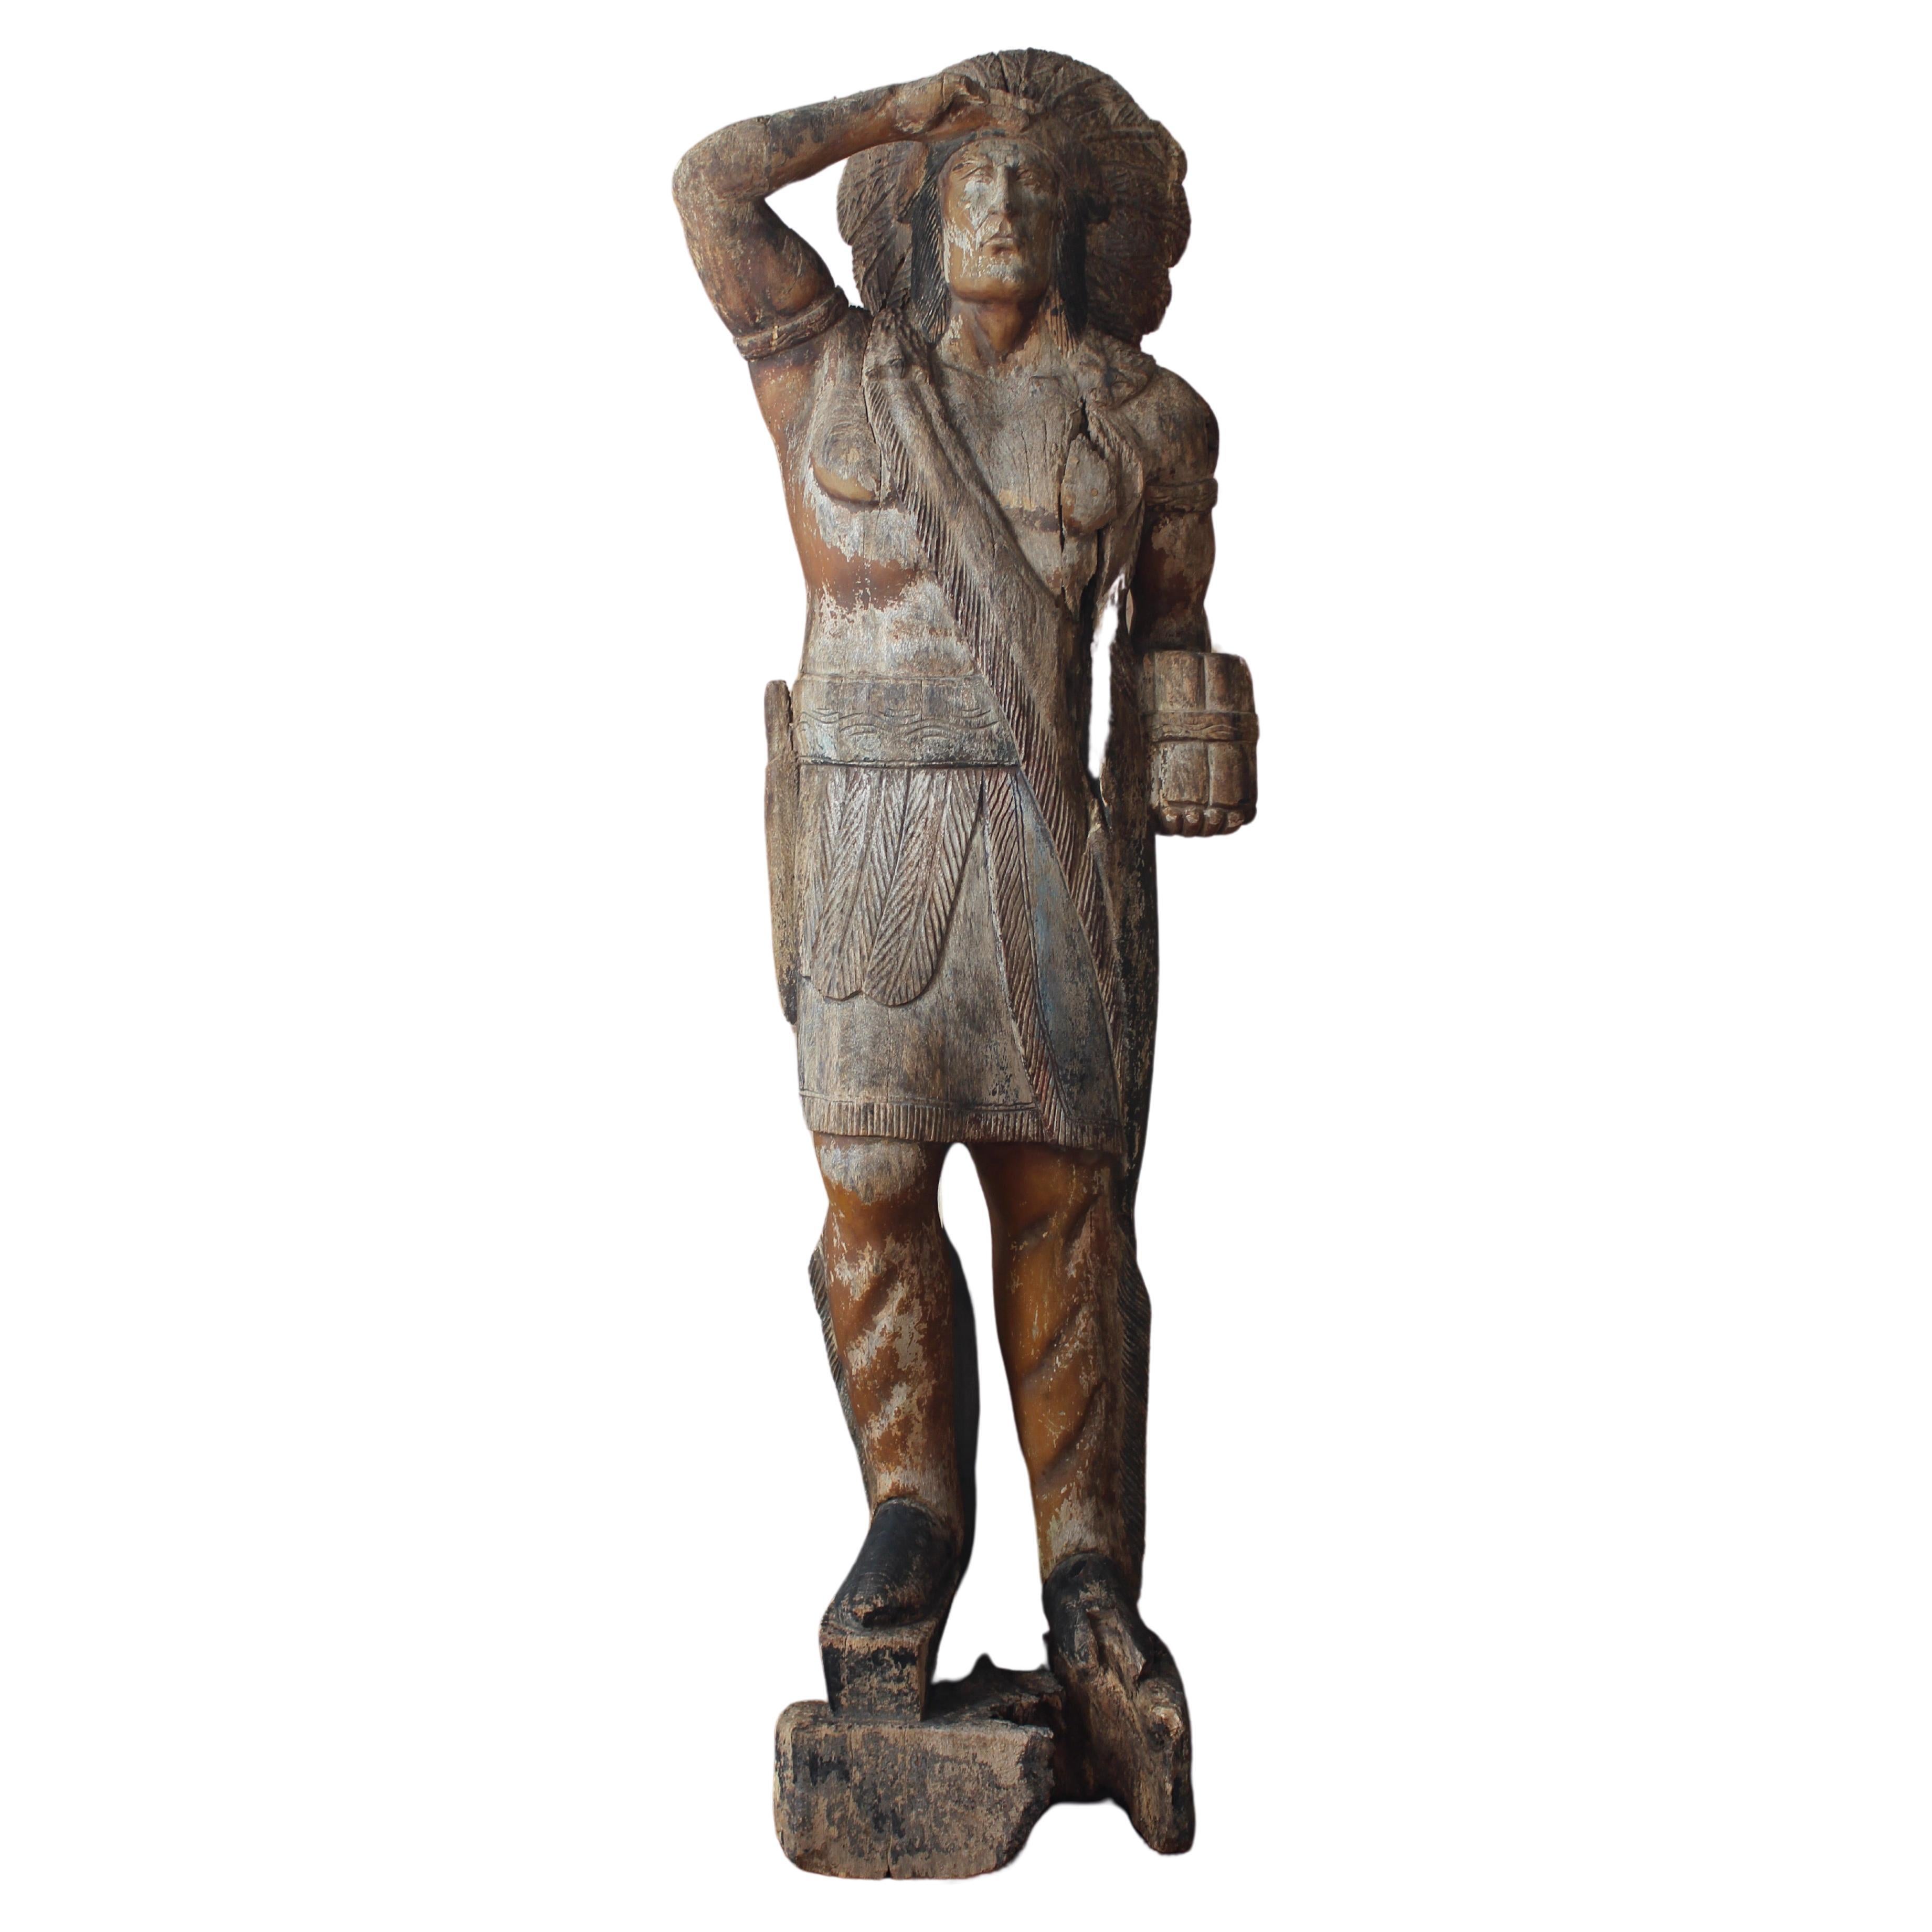 A life size carved pitch pine cigar/tobacconist trade sign/point of sale in the form of an Indian. Often placed outside of a shop, the cigar store Indian became less common in the 20th century for a variety of reasons. Sidewalk-obstruction laws